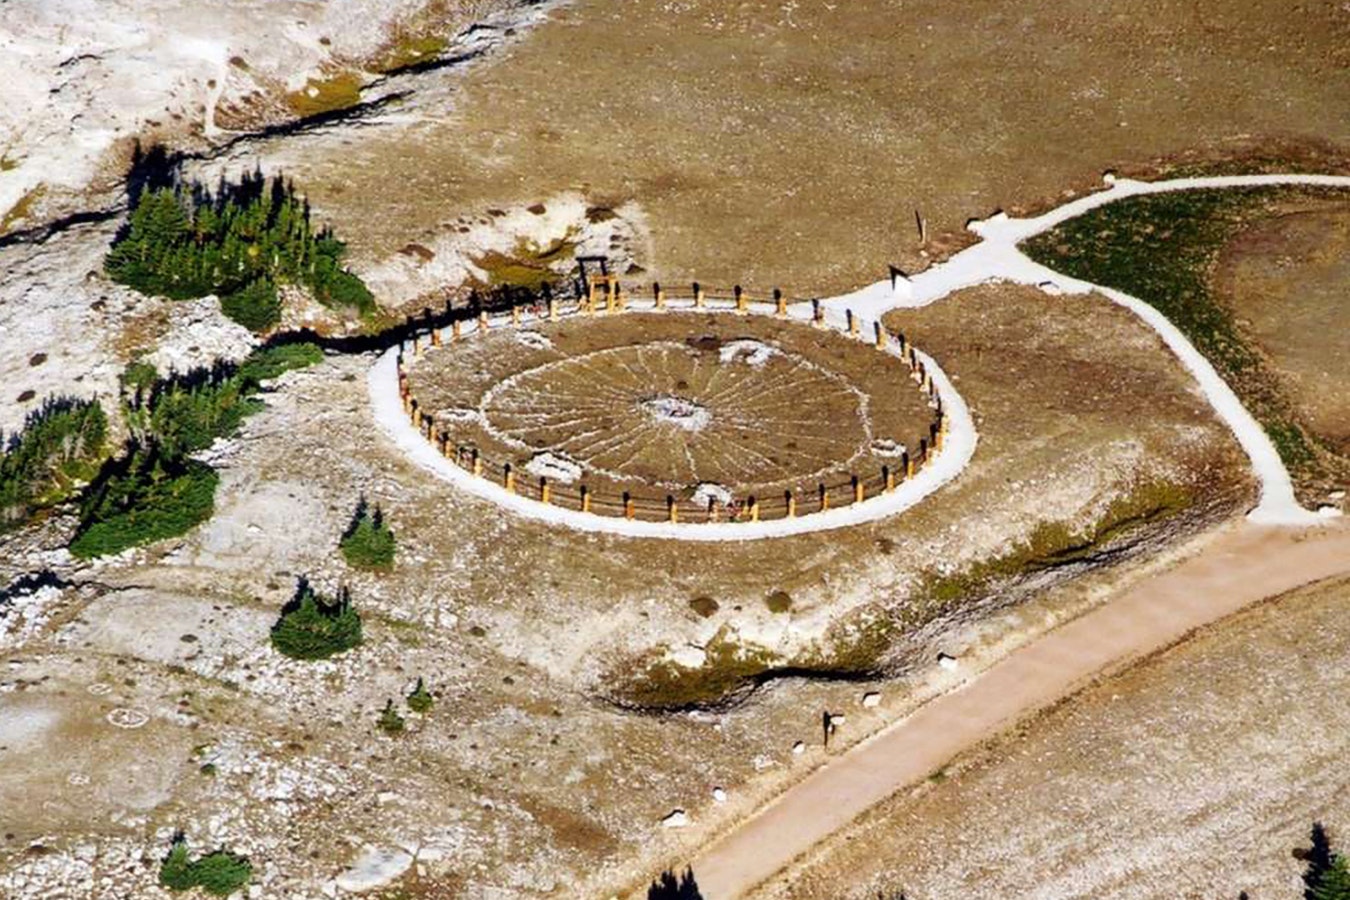 The Medicine Wheel and Medicine Mountain National Historic Landmark in 2011. The rock circle is about 80 feet in diameter, with 28 '"spokes" radiating from a central cairn, five cairns around the rim and a sixth slightly outside the perimeter.